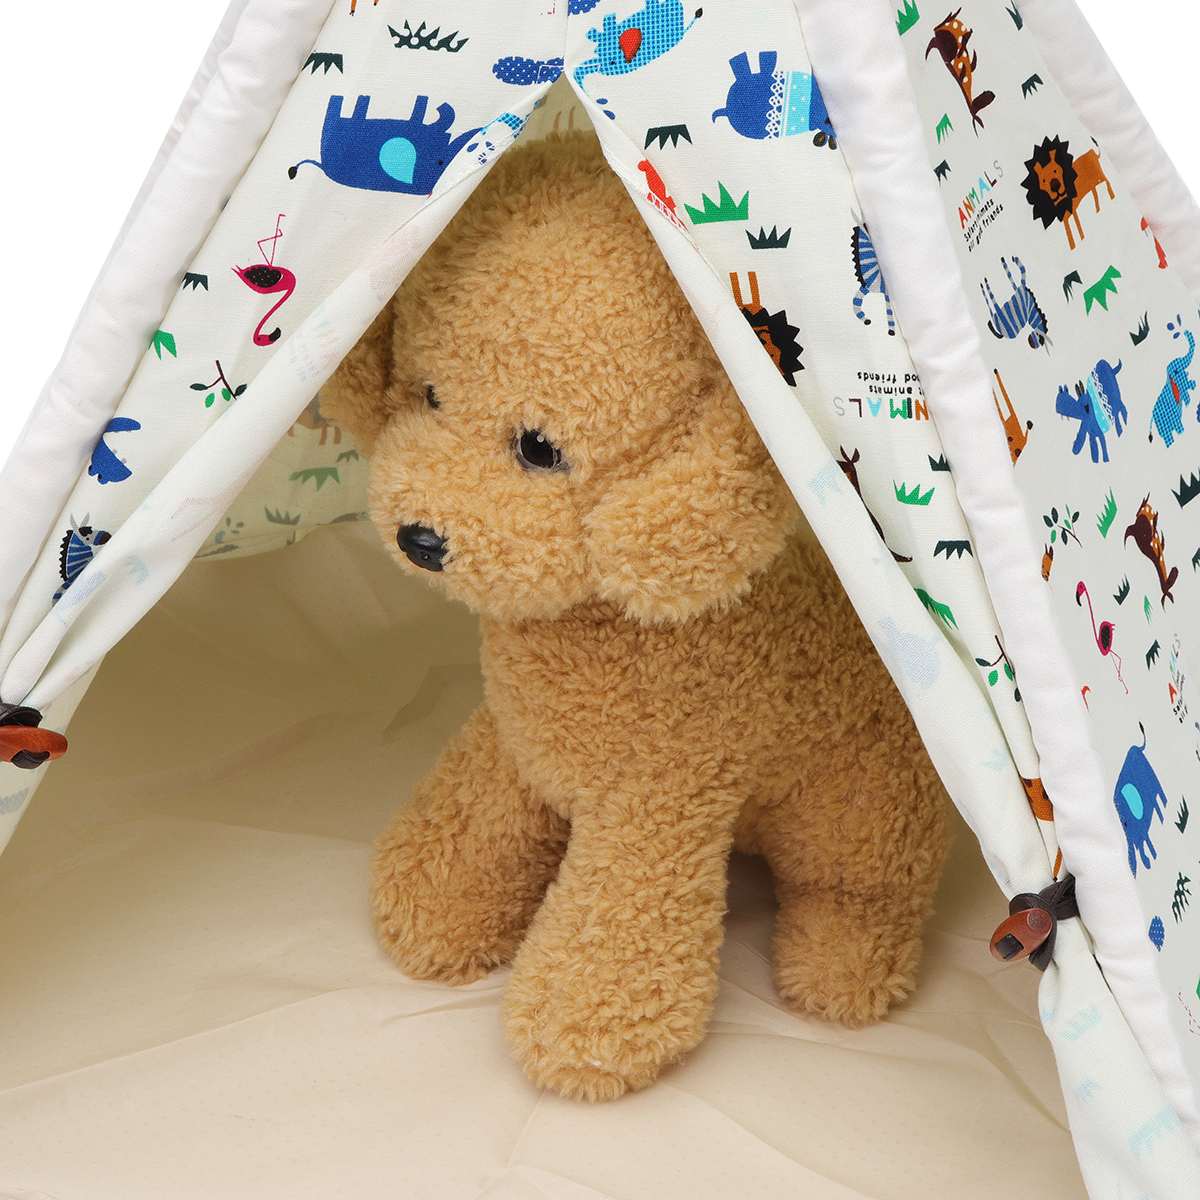 Pet-Dog-House-Washable-Tent-Puppy-Cat-Indoor-Outdoor-Home-Play-Teepee--Pet-Bed-1346120-5